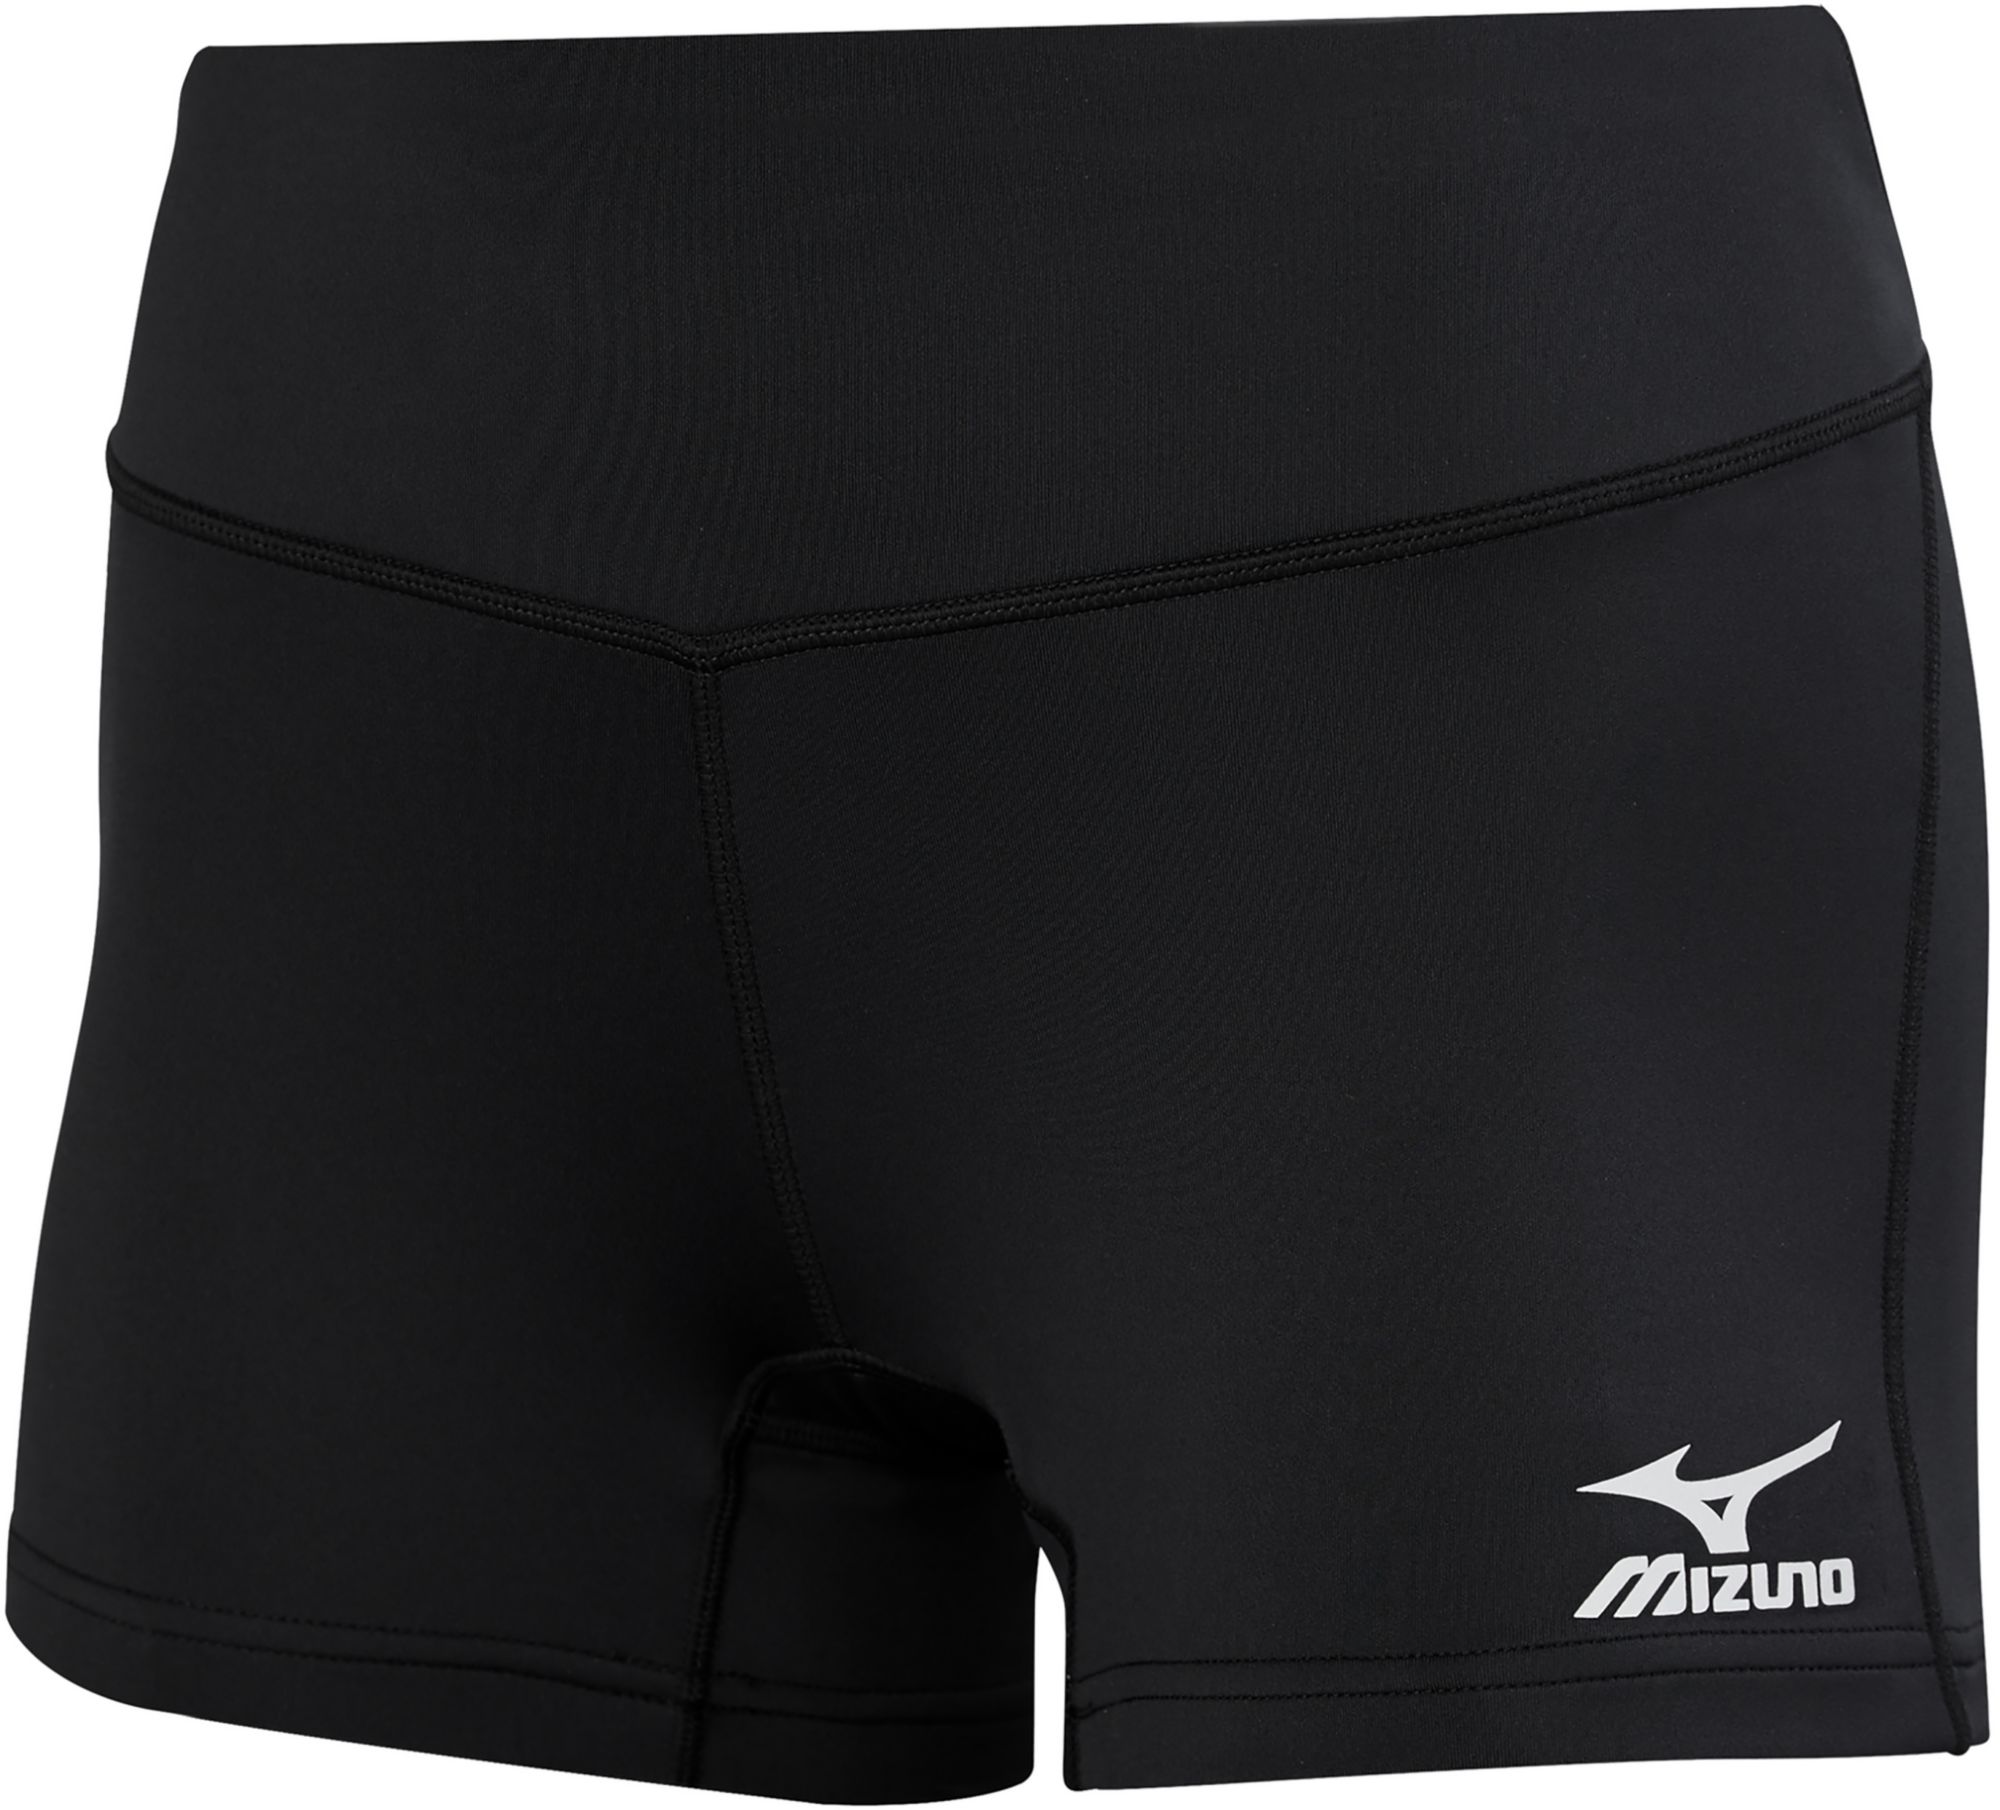 Mizuno Youth Victory 3.5 Inseam Volleyball Shorts